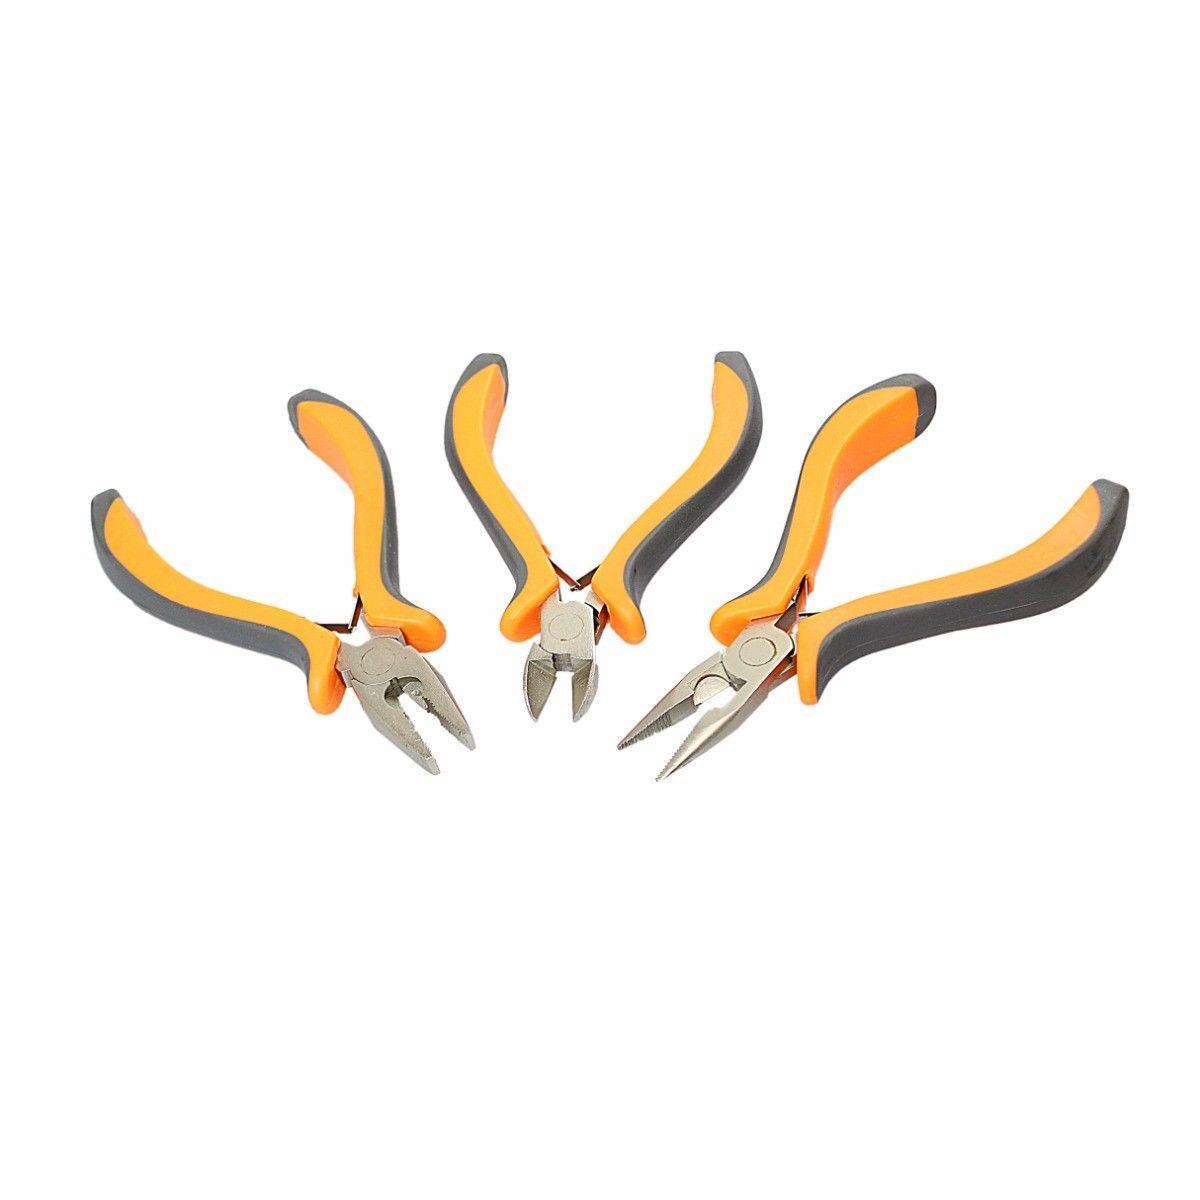 Assorted Pliers Pack of 3 4203 (Large Letter Rate)